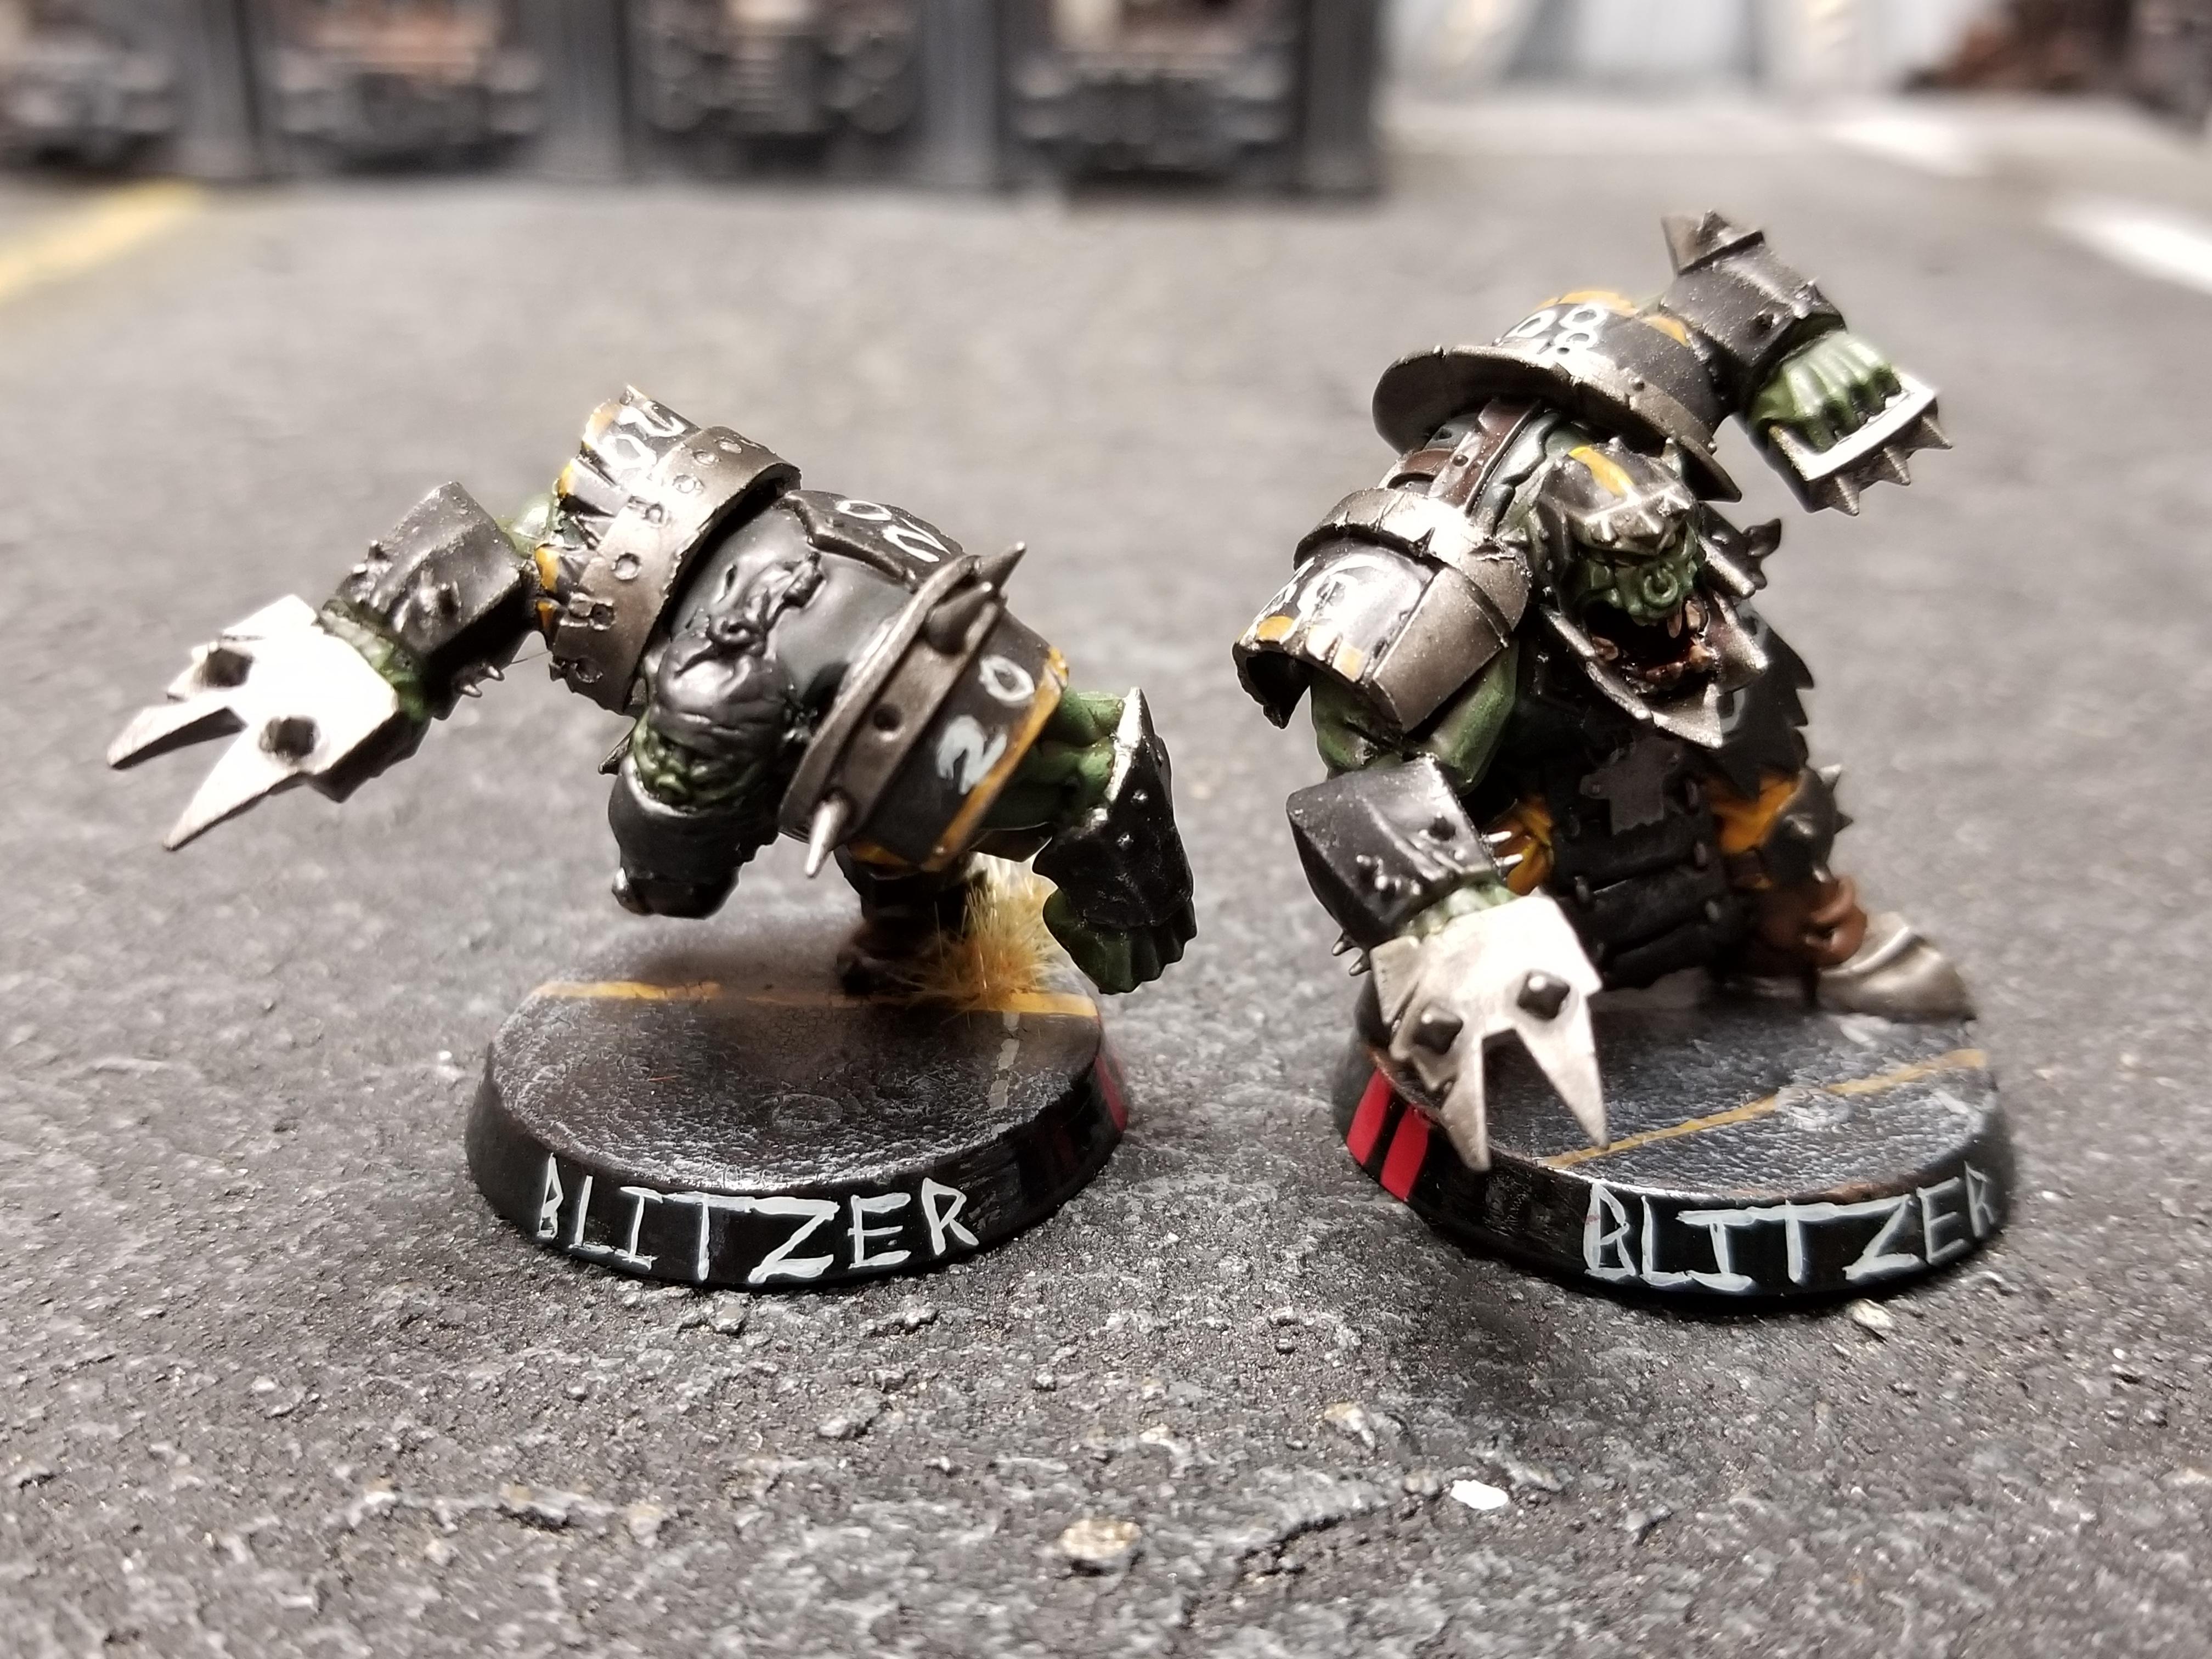 Blitzers, Blood Bowl, Conversion, Go Steelers, Goblins, Gouged Eyes, Kitbash, Orcs, Orks, Pittsburgh